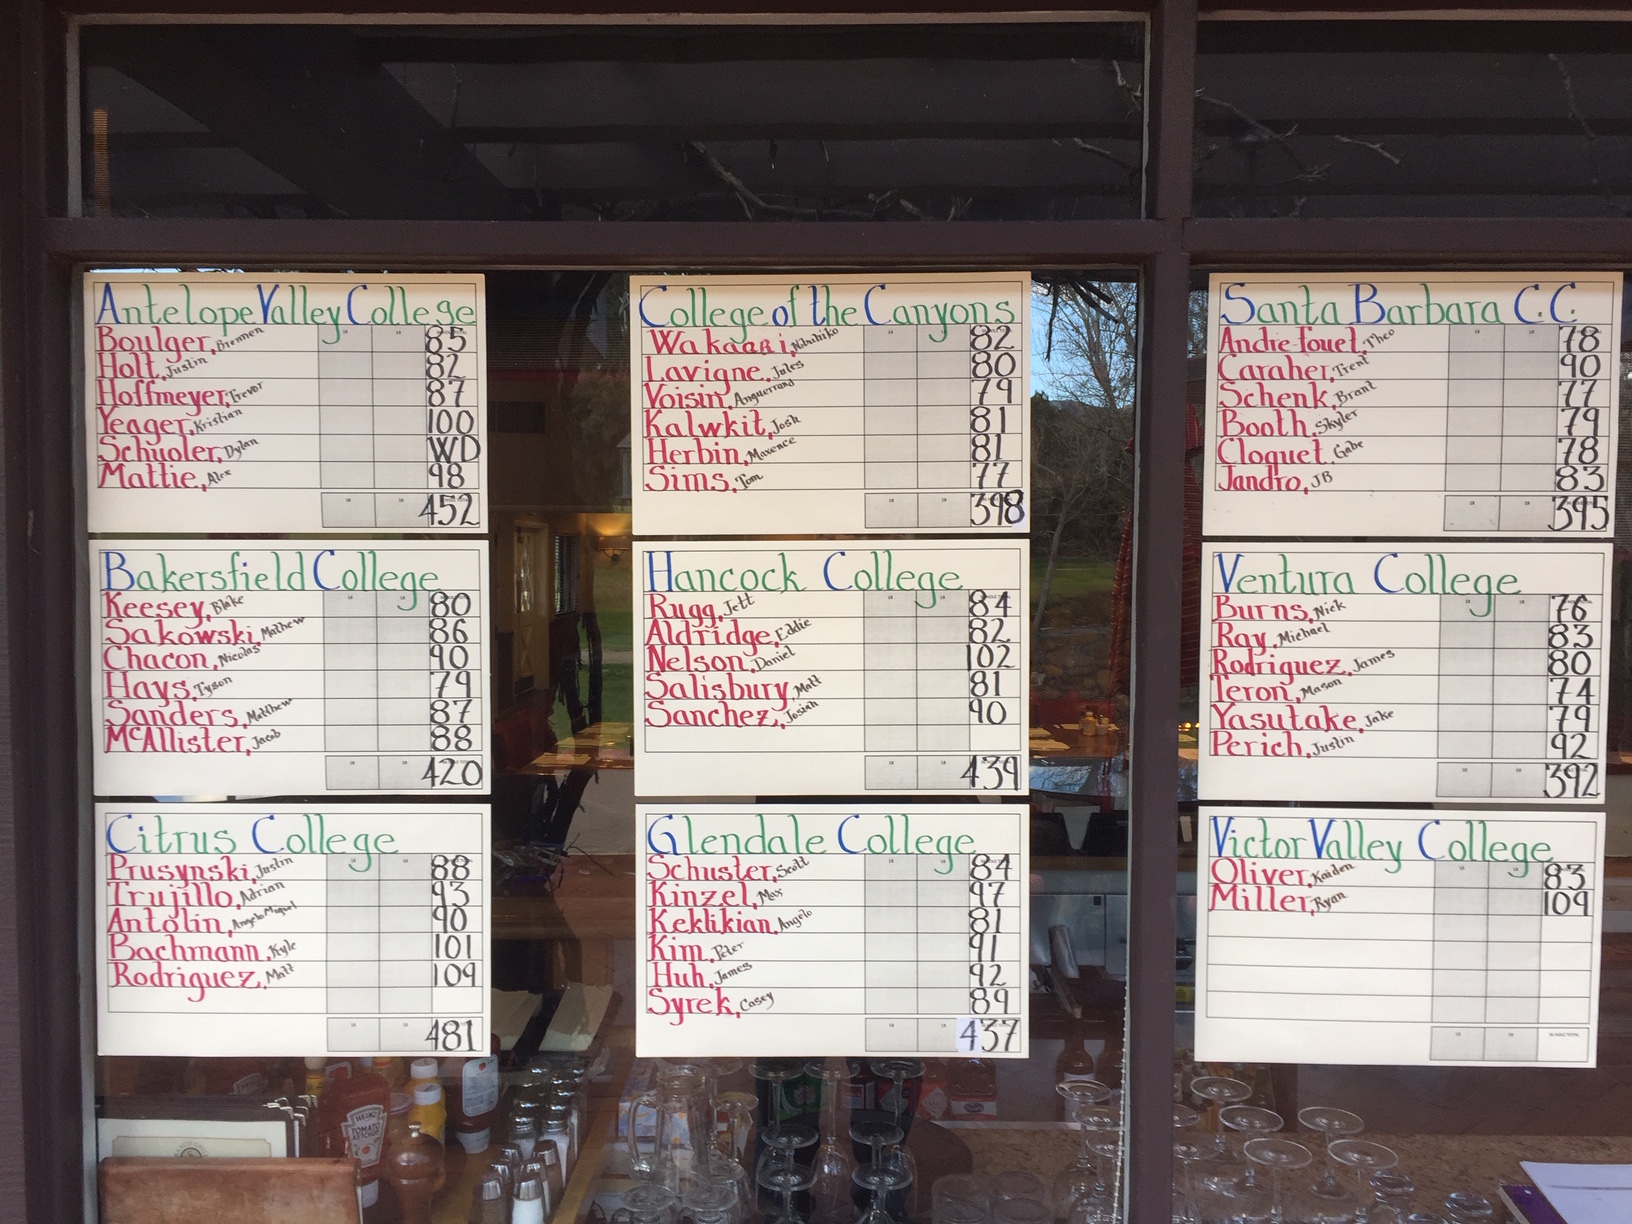 Western State Conference men's golf team results for event on Feb. 18, 2019.